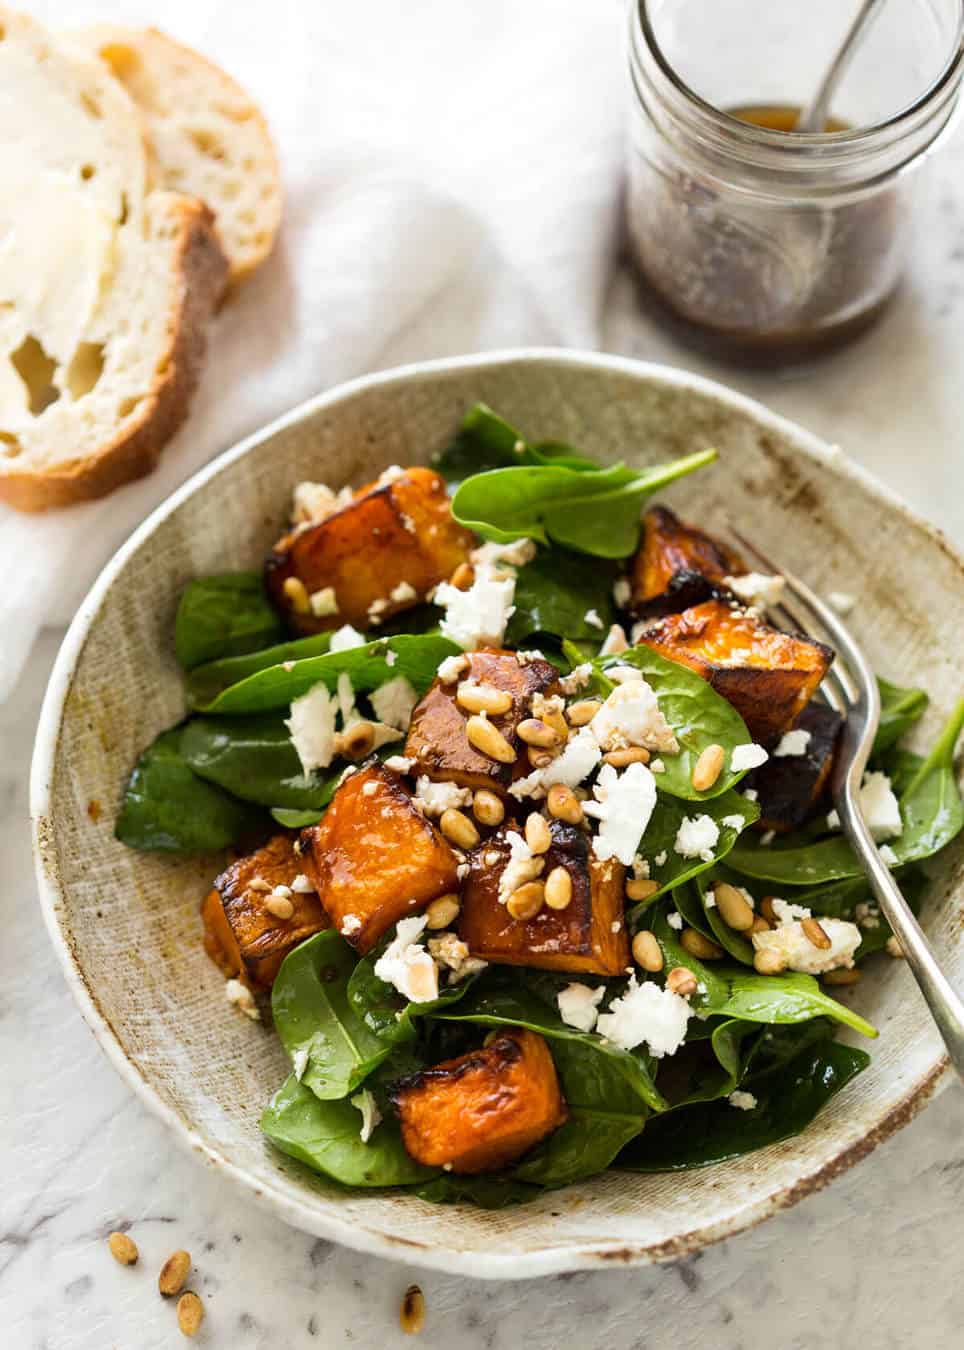 This Roast Pumpkin, Spinach and Feta Salad with a Honey Balsamic Dressing is a magical combination. Terrific side or as a meal. www.recipetineats.com